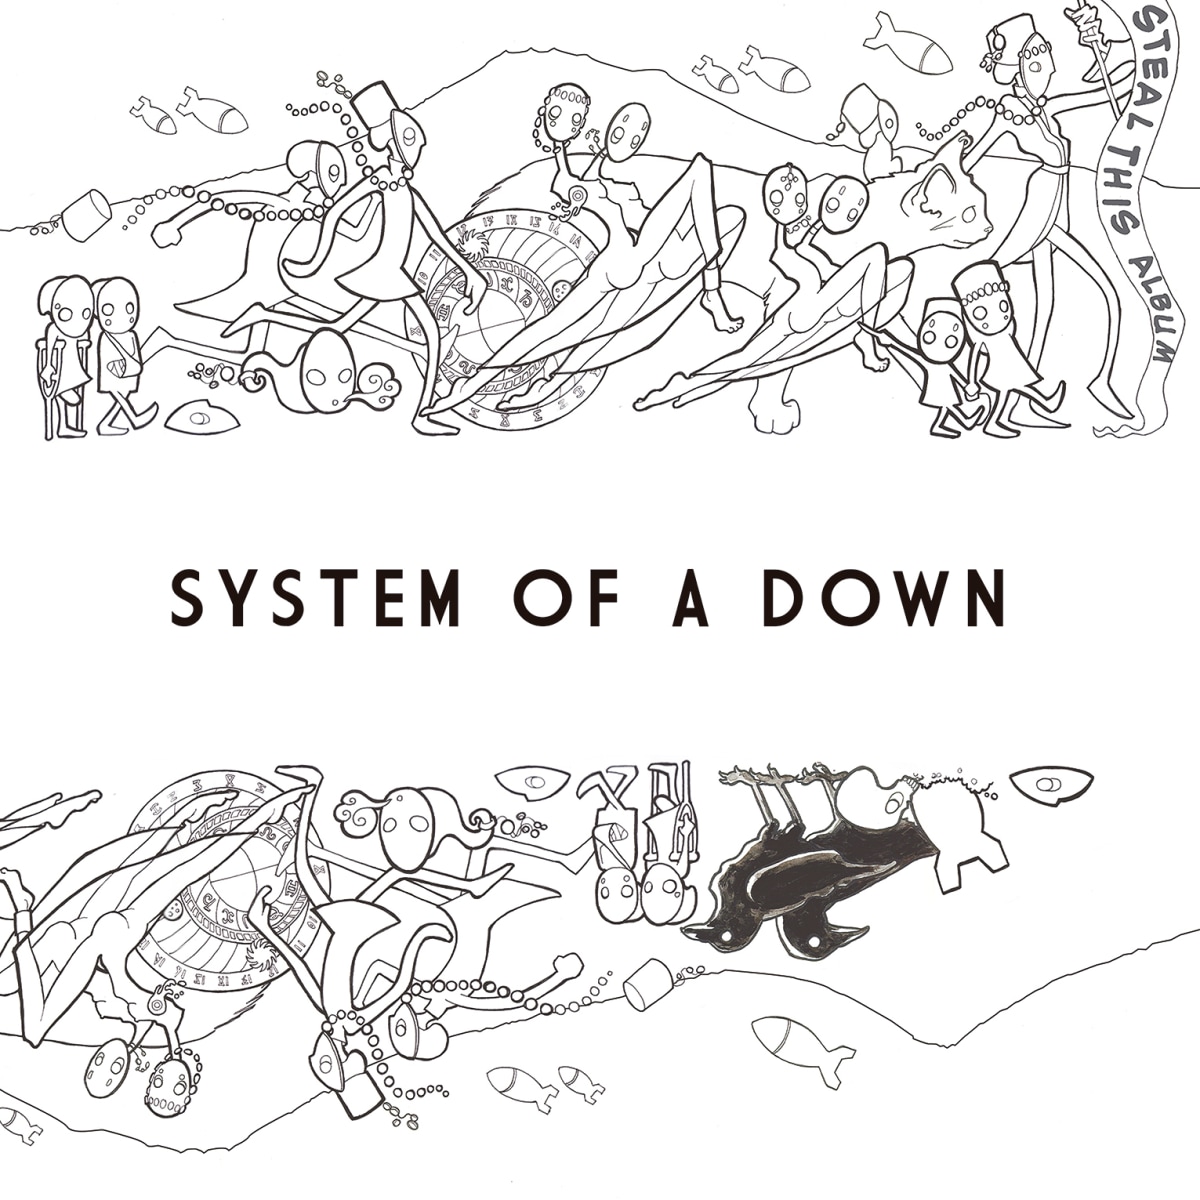 System Of A Down/Steal This Album - Album by System Of A Down